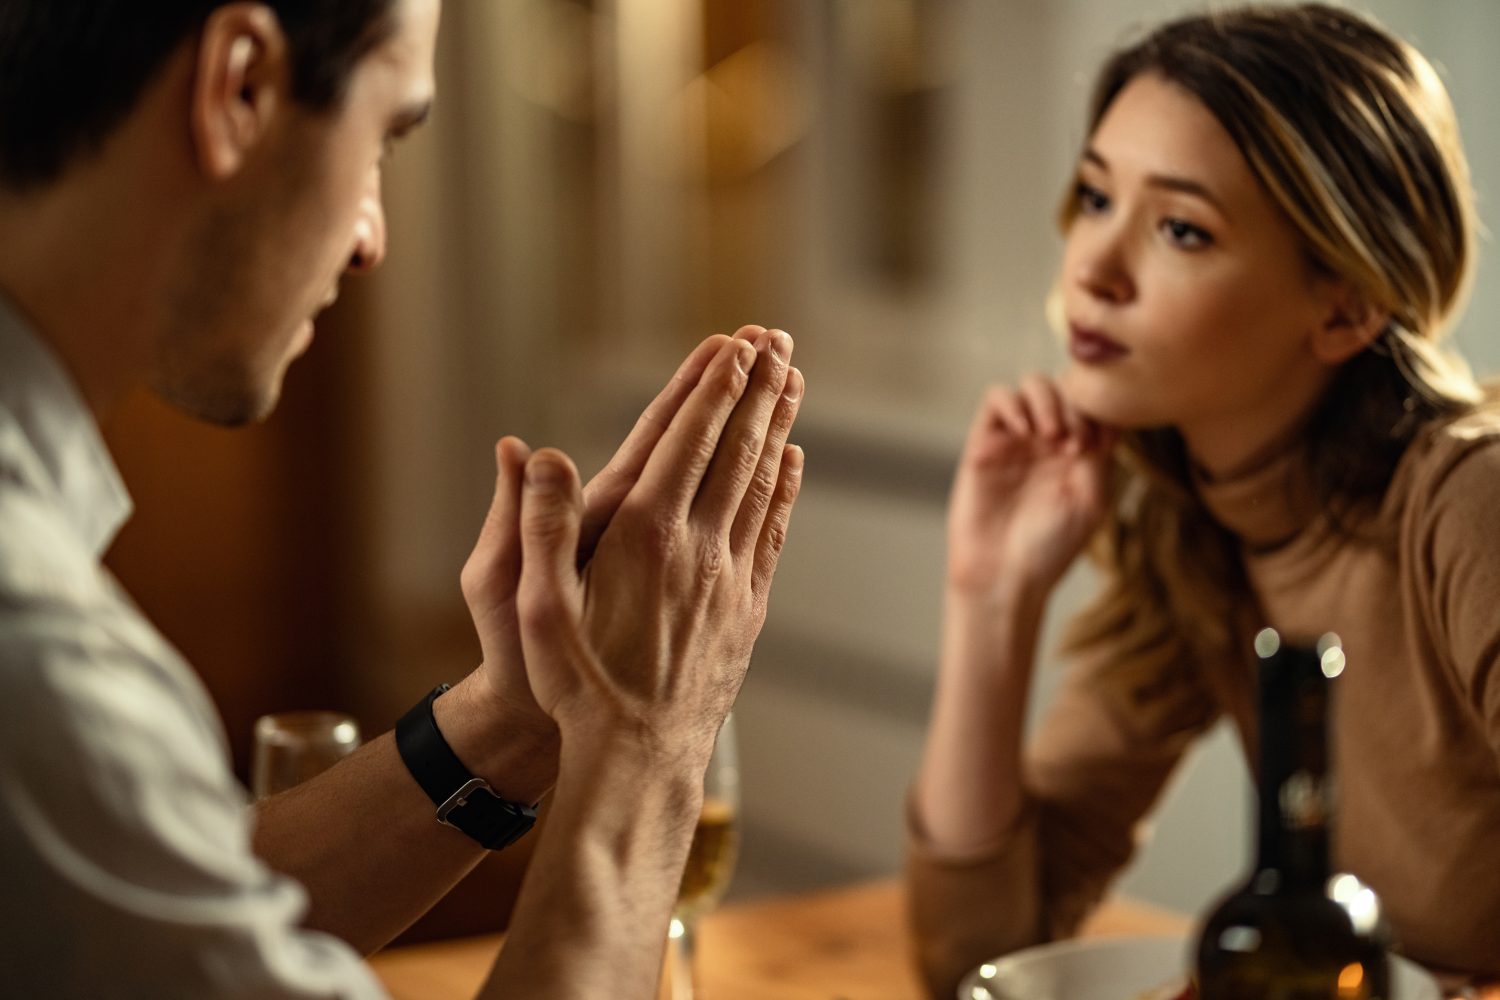 The Top 10 Reasons Men Break Up With Women As Told By A Guy